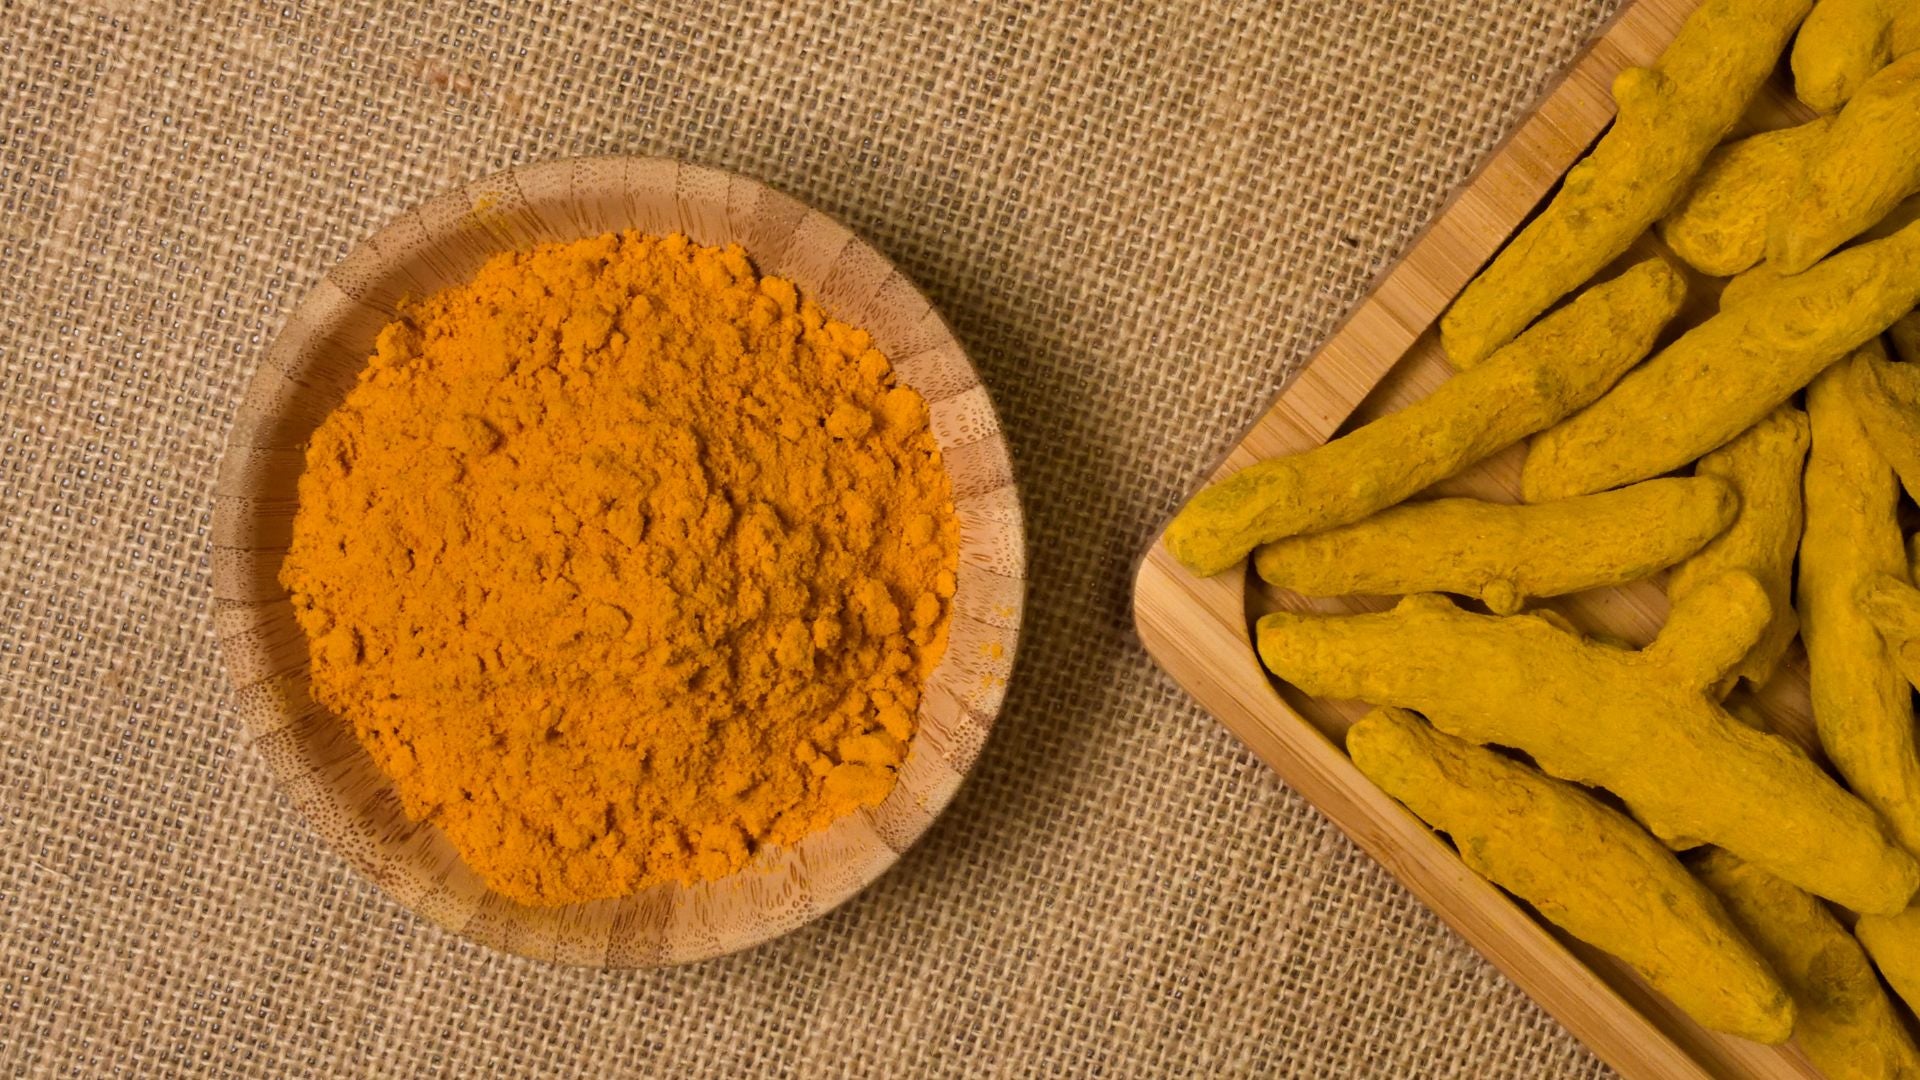 Is it better to take turmeric capsules or powder?